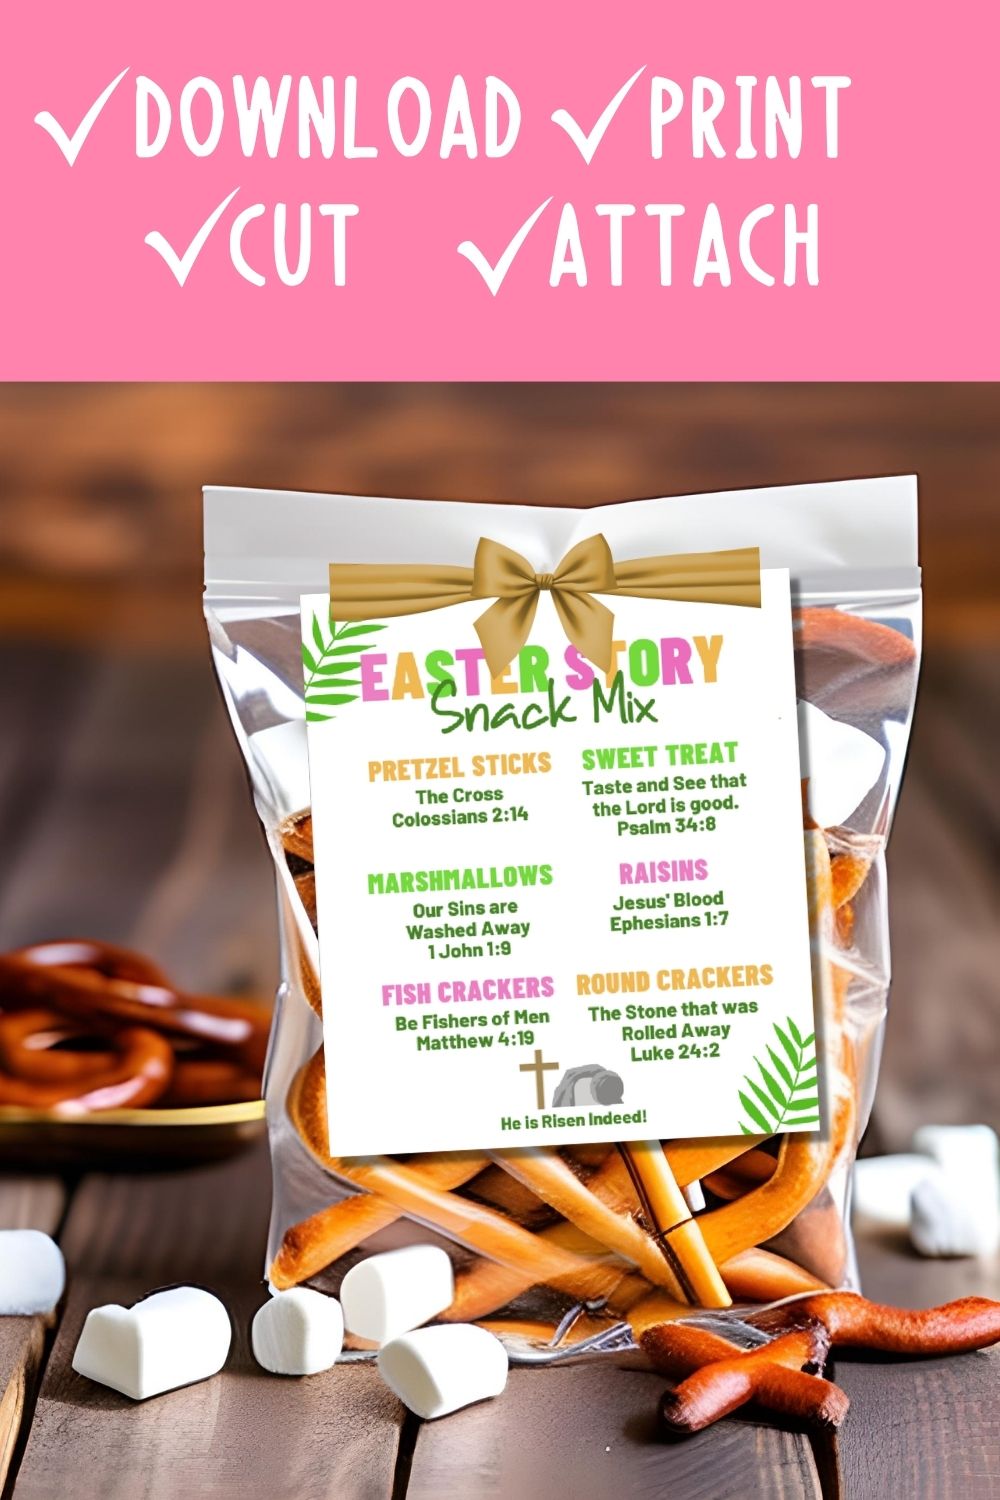 Easter Story Snack Mix Tags